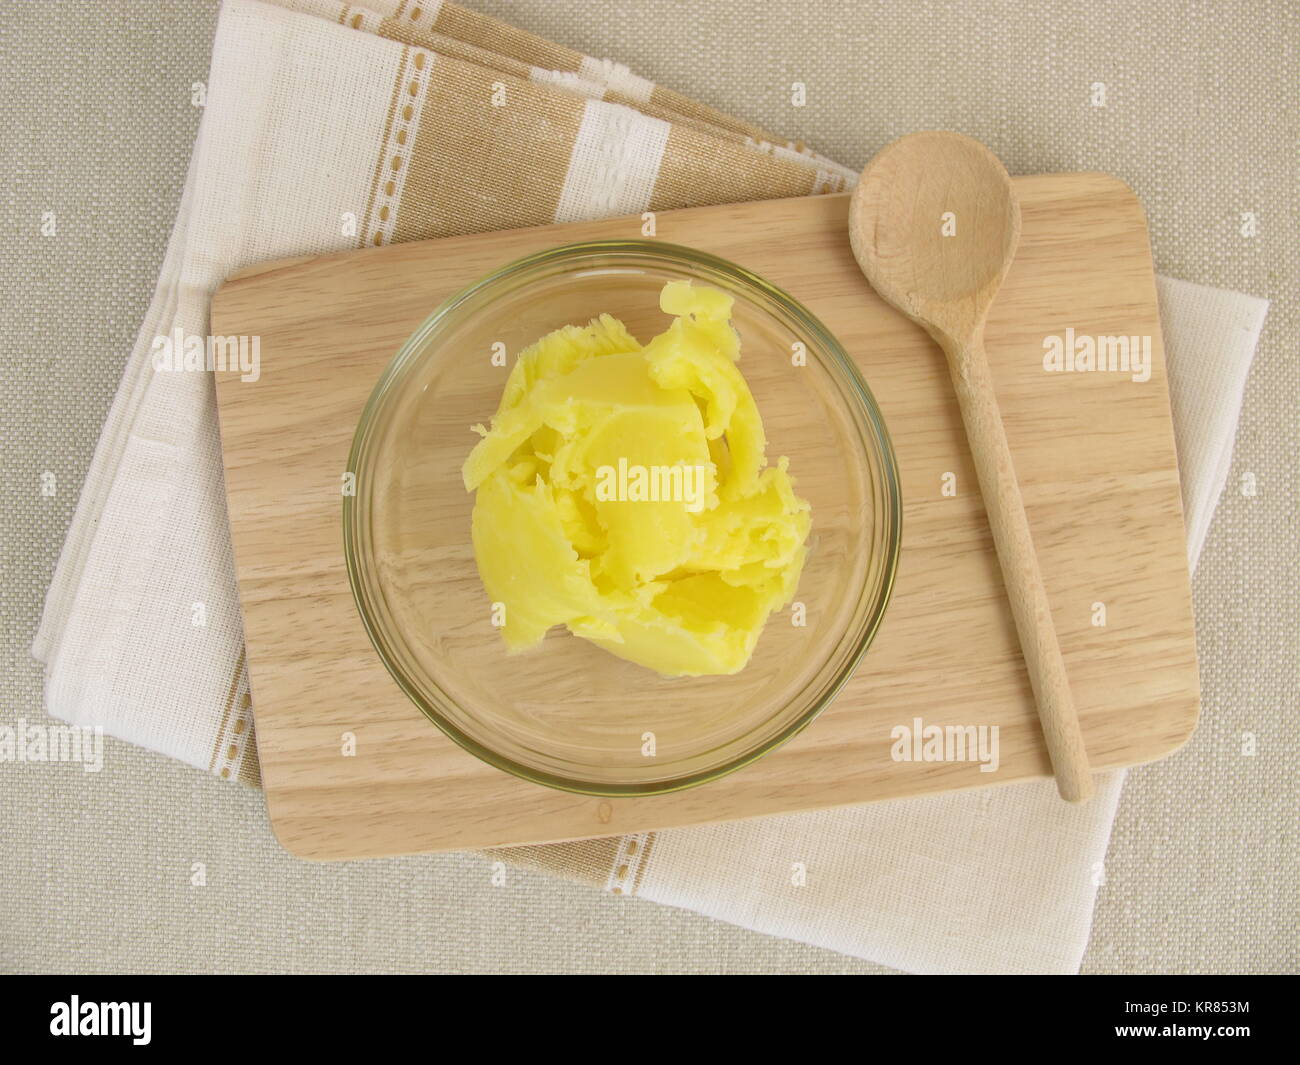 Butter At Room Temperature Stock Photo 169210040 Alamy